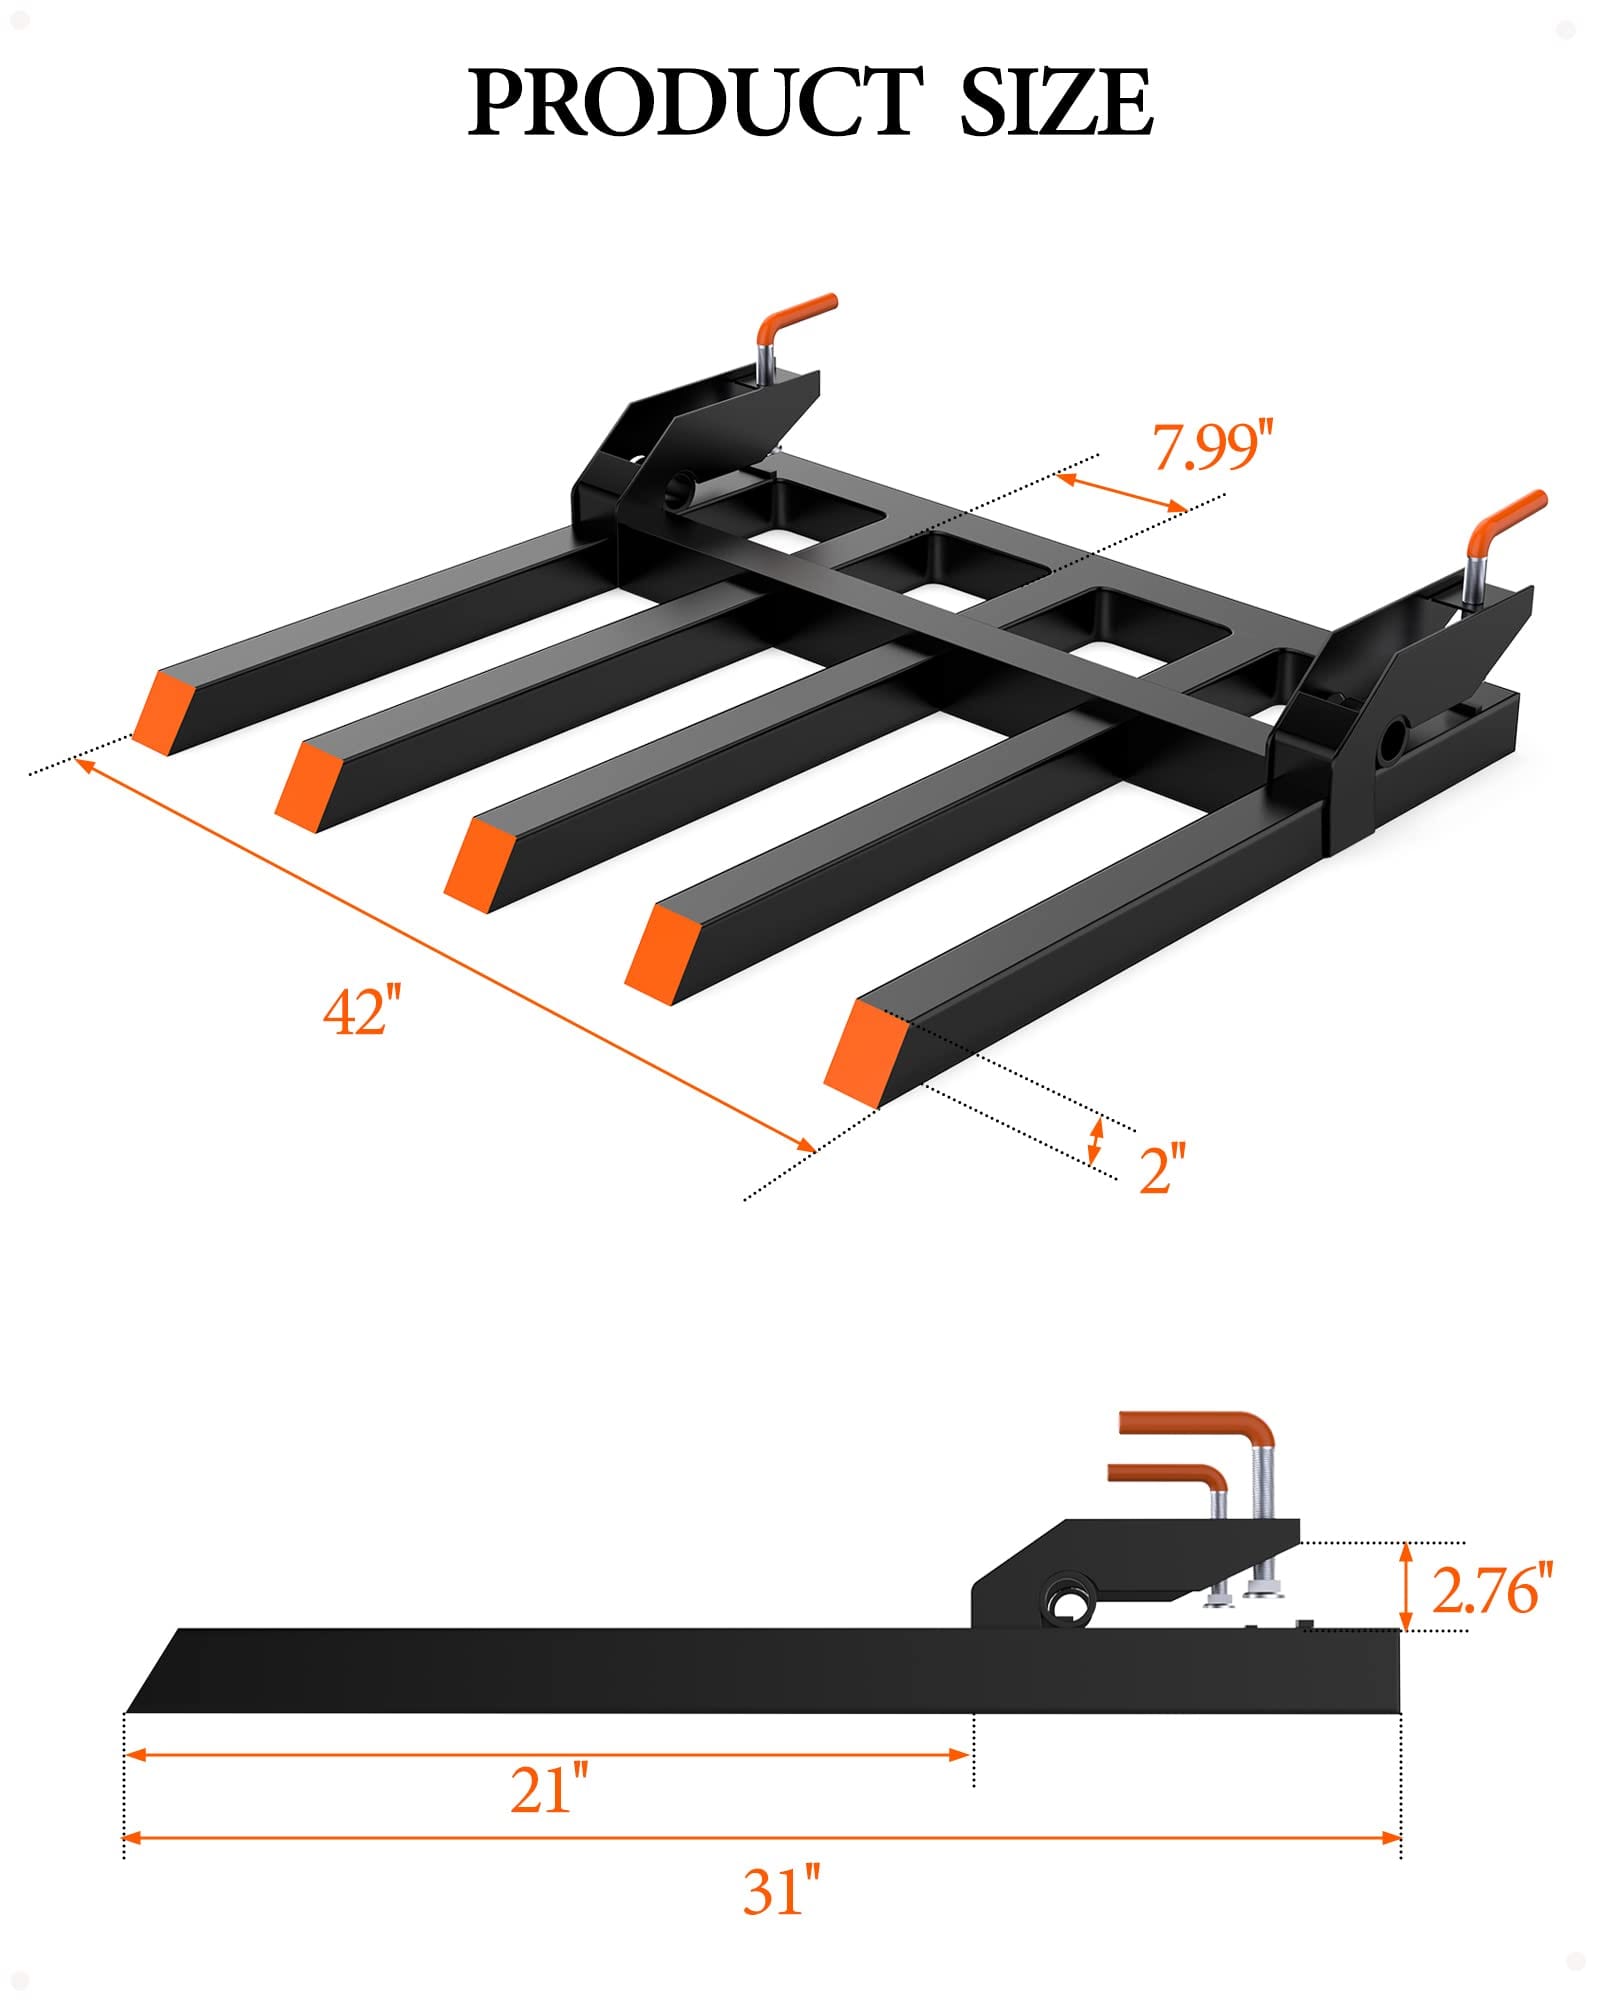 GARVEE 2500 LBS 42 Inch Clamp on Debris Forks Heavy Duty Clamp-on Pallet Forks for Tractor Black